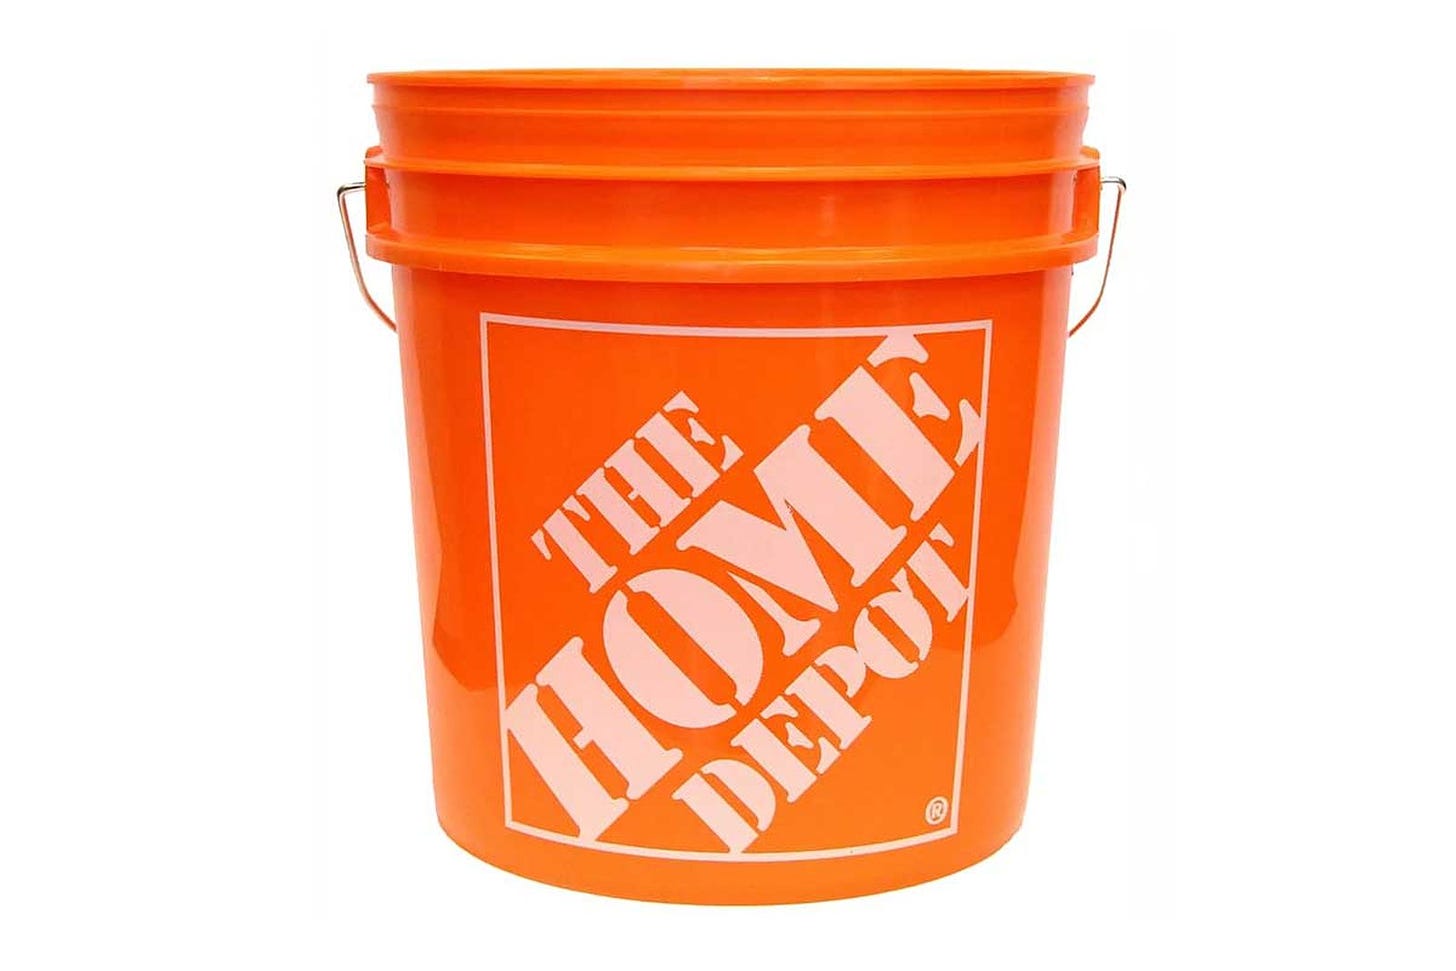 Japanese Boutiques Are Reselling Home Depot Buckets